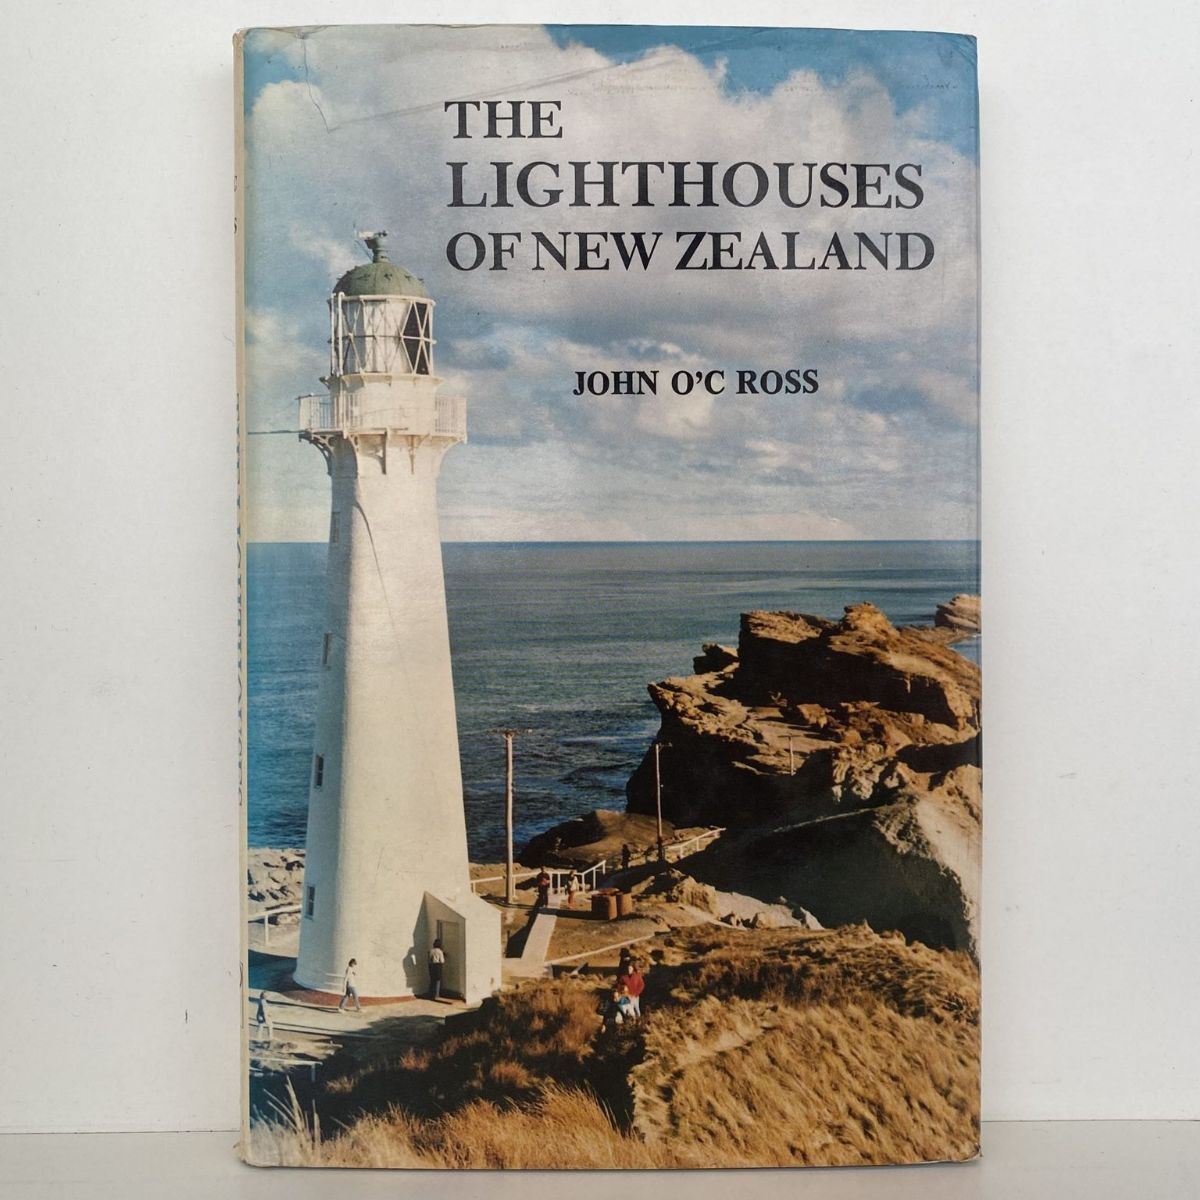 THE LIGHTHOUSES OF NEW ZEALAND